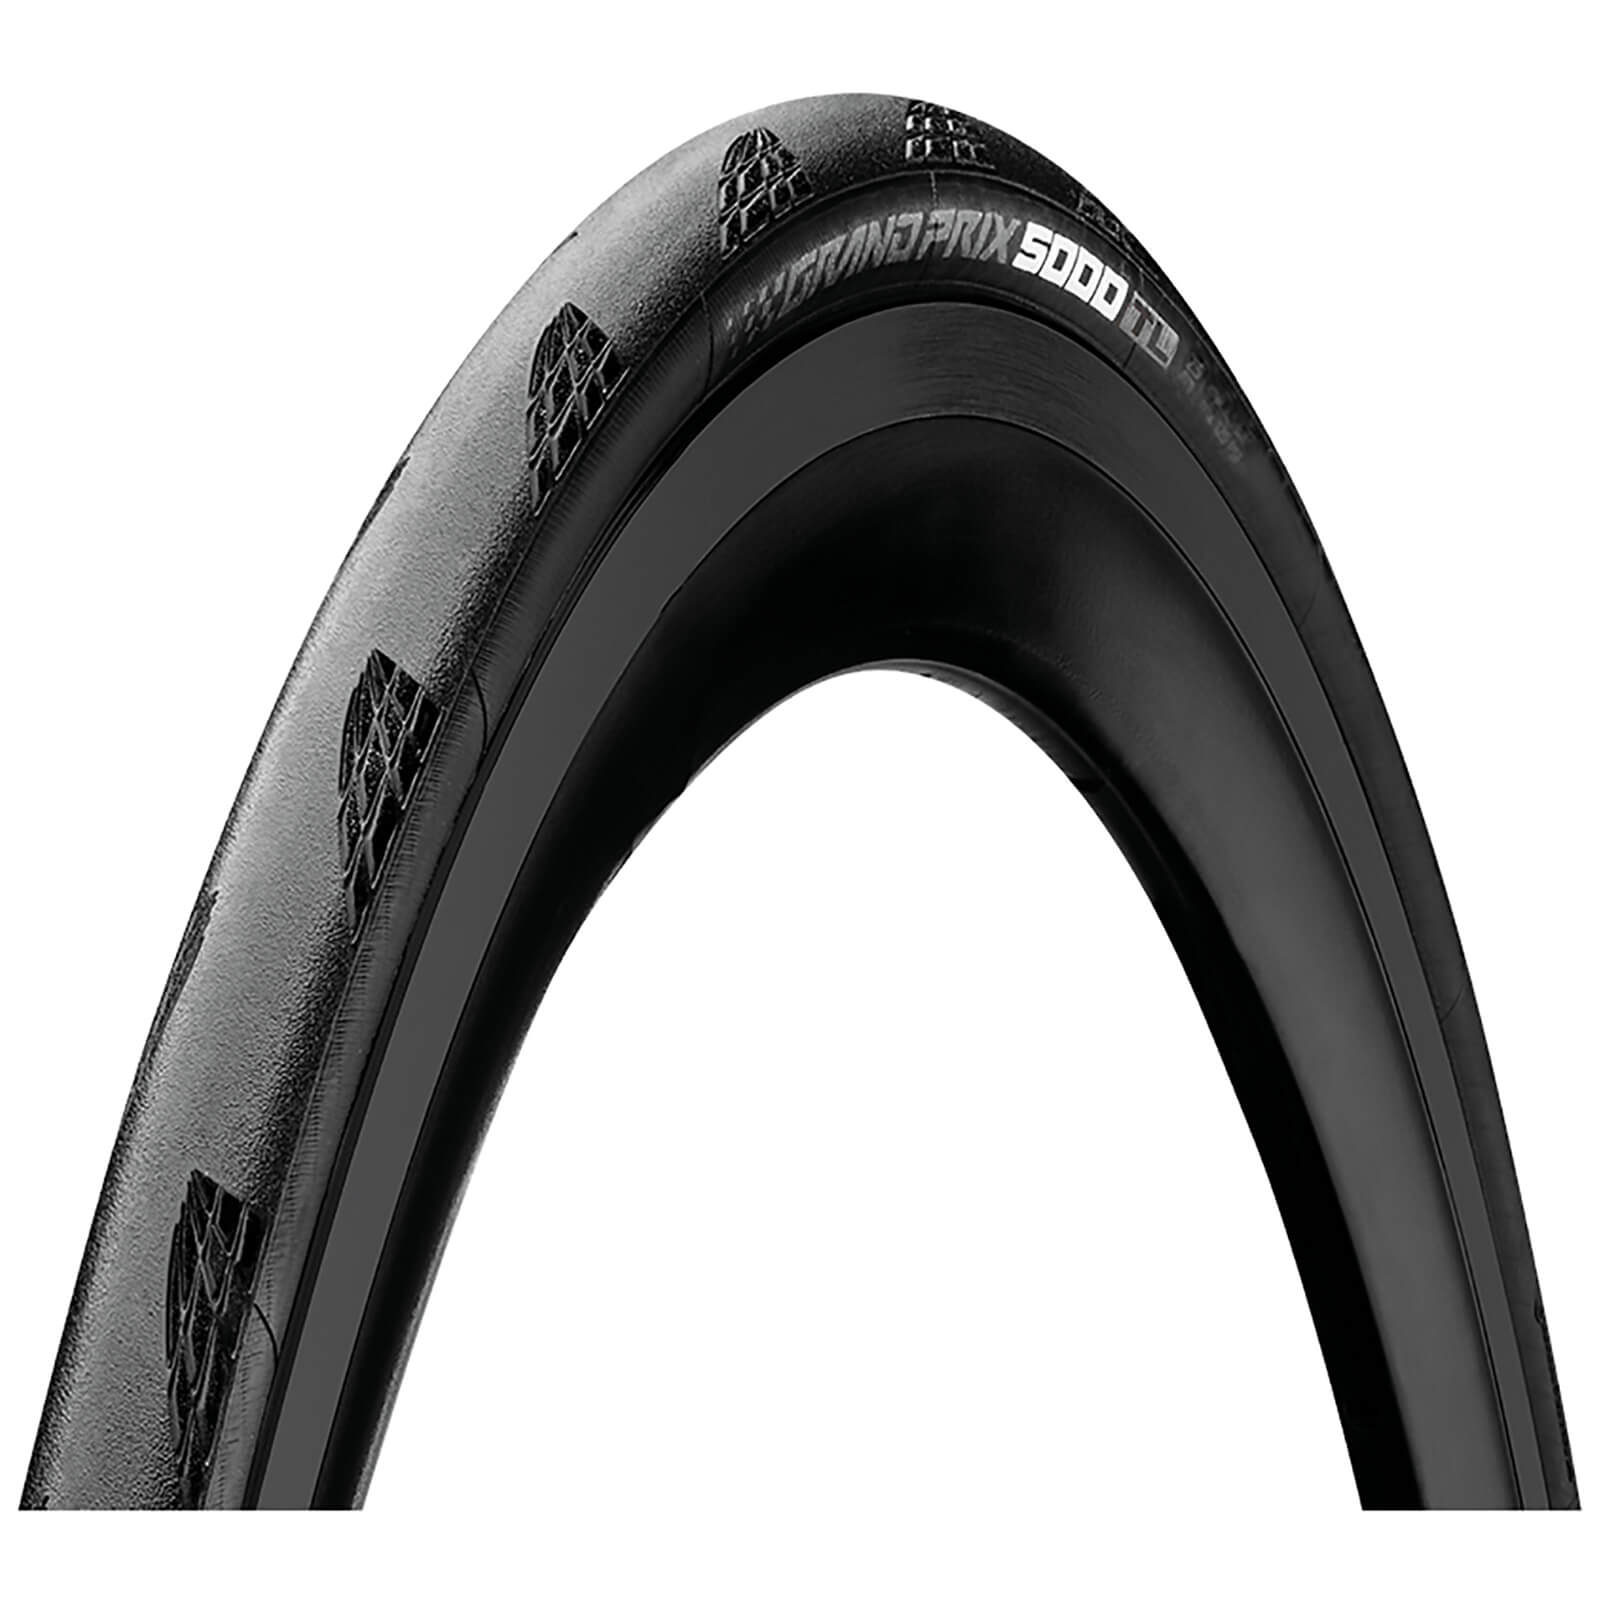 Continental Grand Prix Tubeless Clincher Road Tyre C X Mm